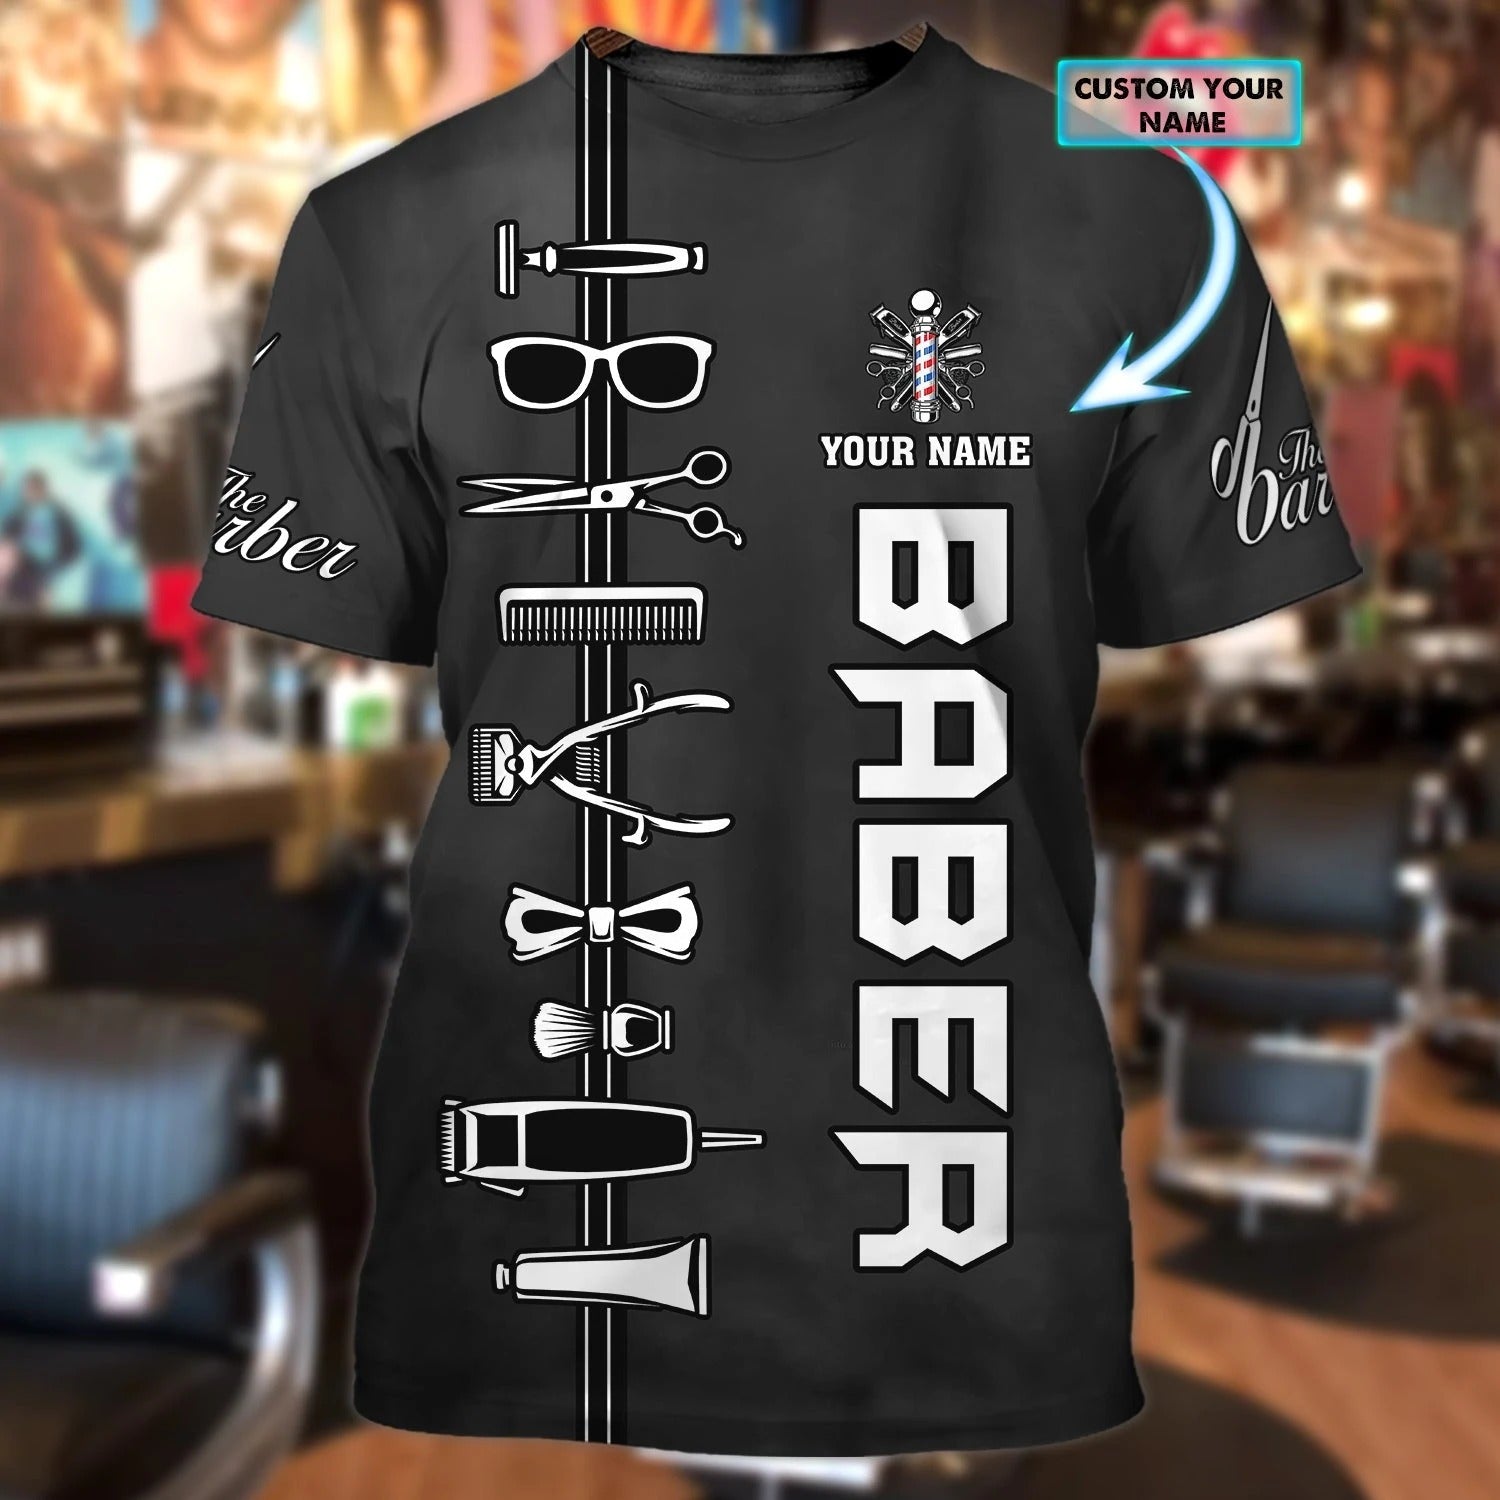 Personalized 3D Tshirt For Baber/ Beauty Salon Barber Shirts/ Best Gift For A Baber Man/ Barber Shirt For Him